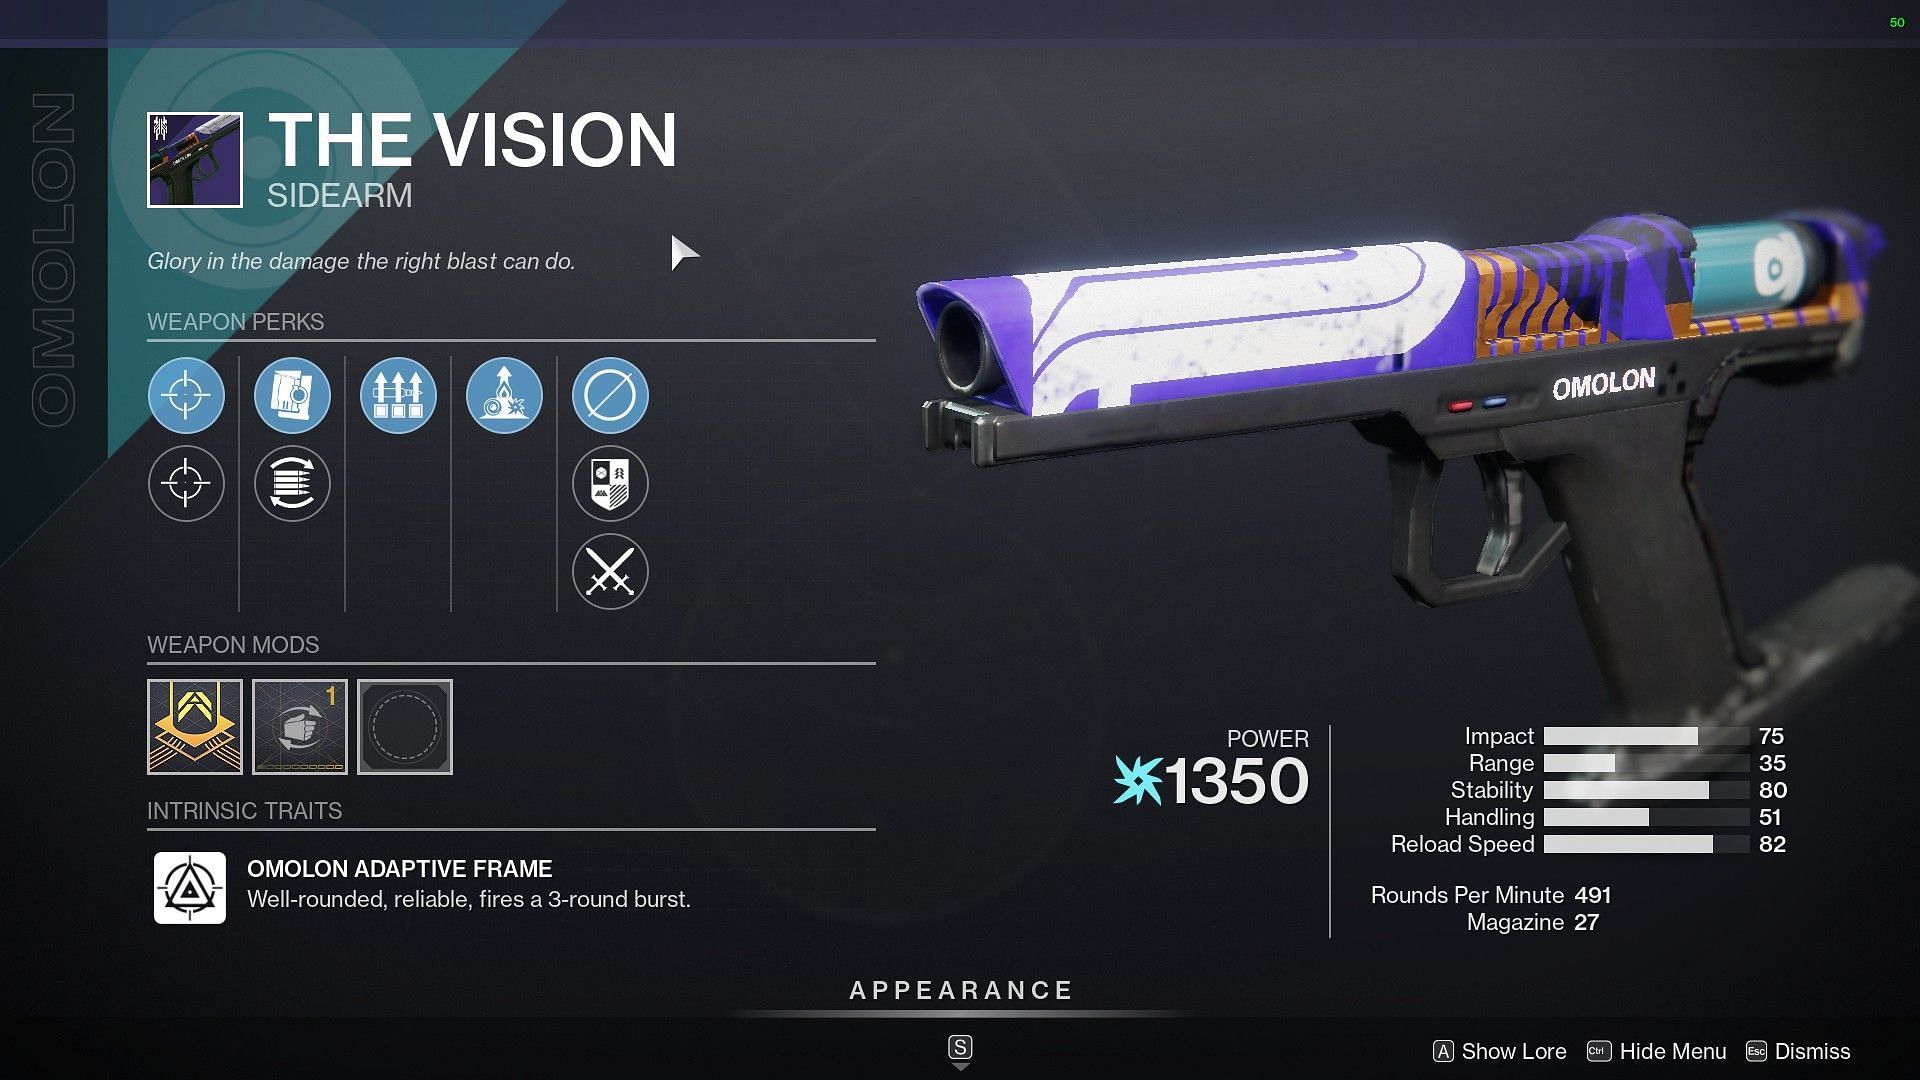 The Vision Sidearm on Banshee for sale (Image via Bungie)